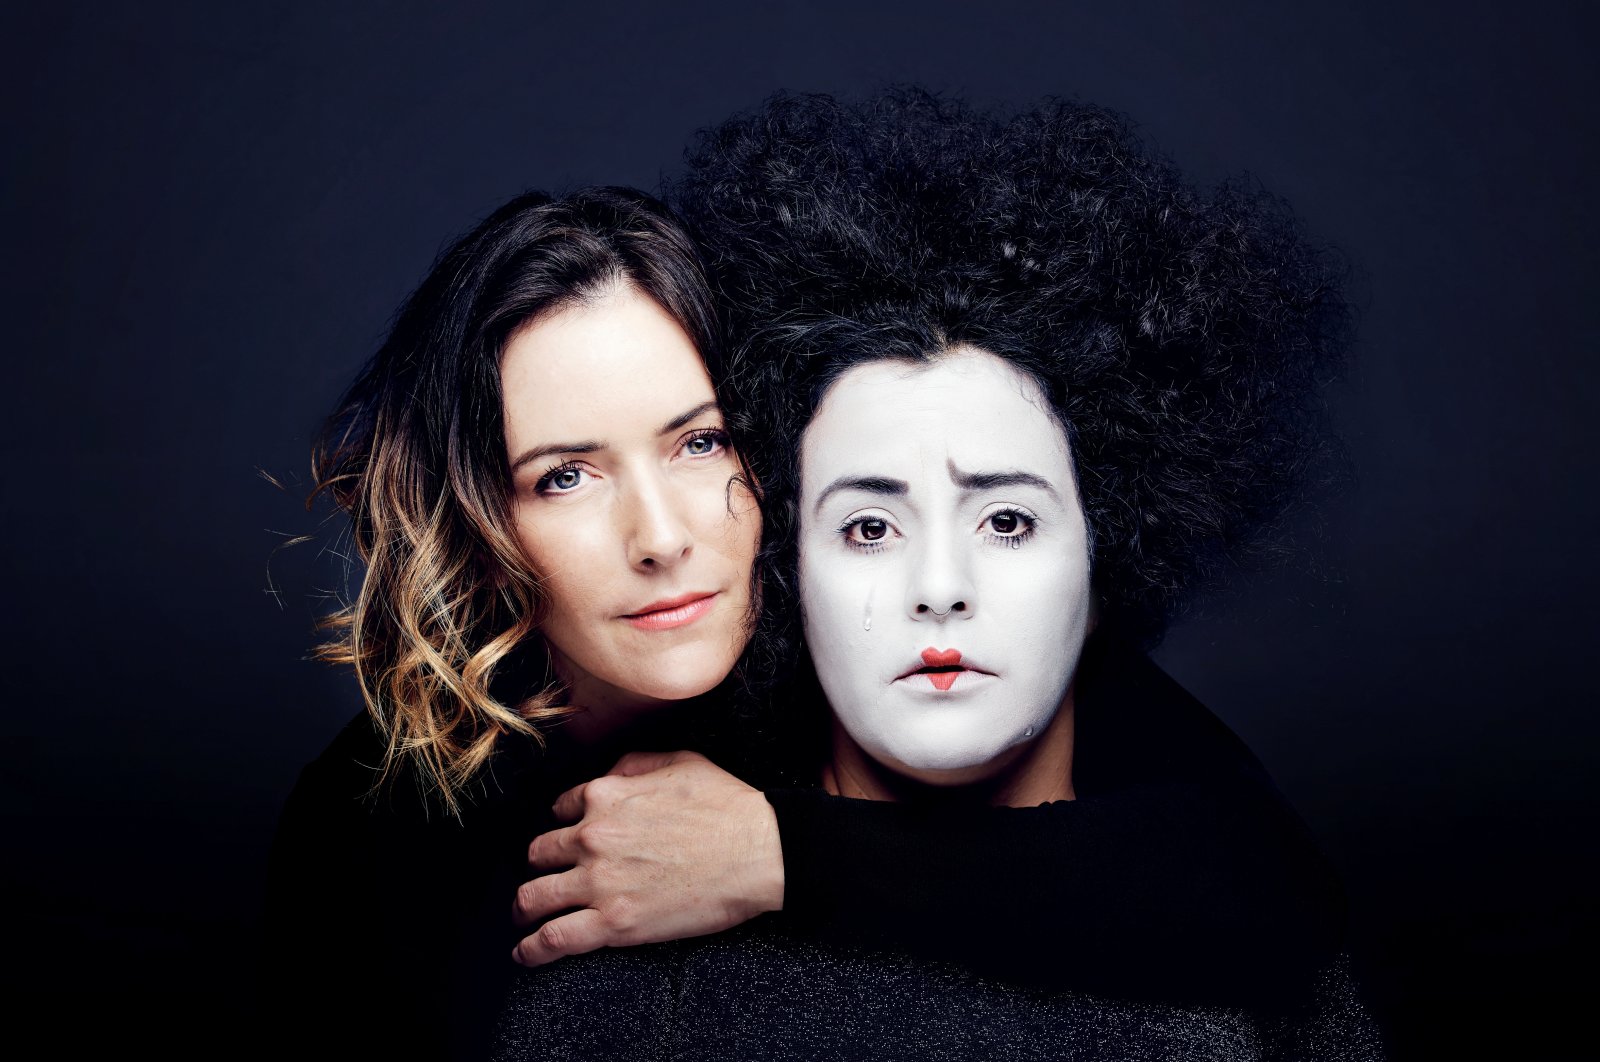 Conductor Alondra de la Parra and clown performer Gabriela Munoz pose for a promotional picture for &quot;The Silence of Sound&quot; in La Bisbal d&#039;Emporda, Spain on Aug. 17, 2021. (REUTERS)